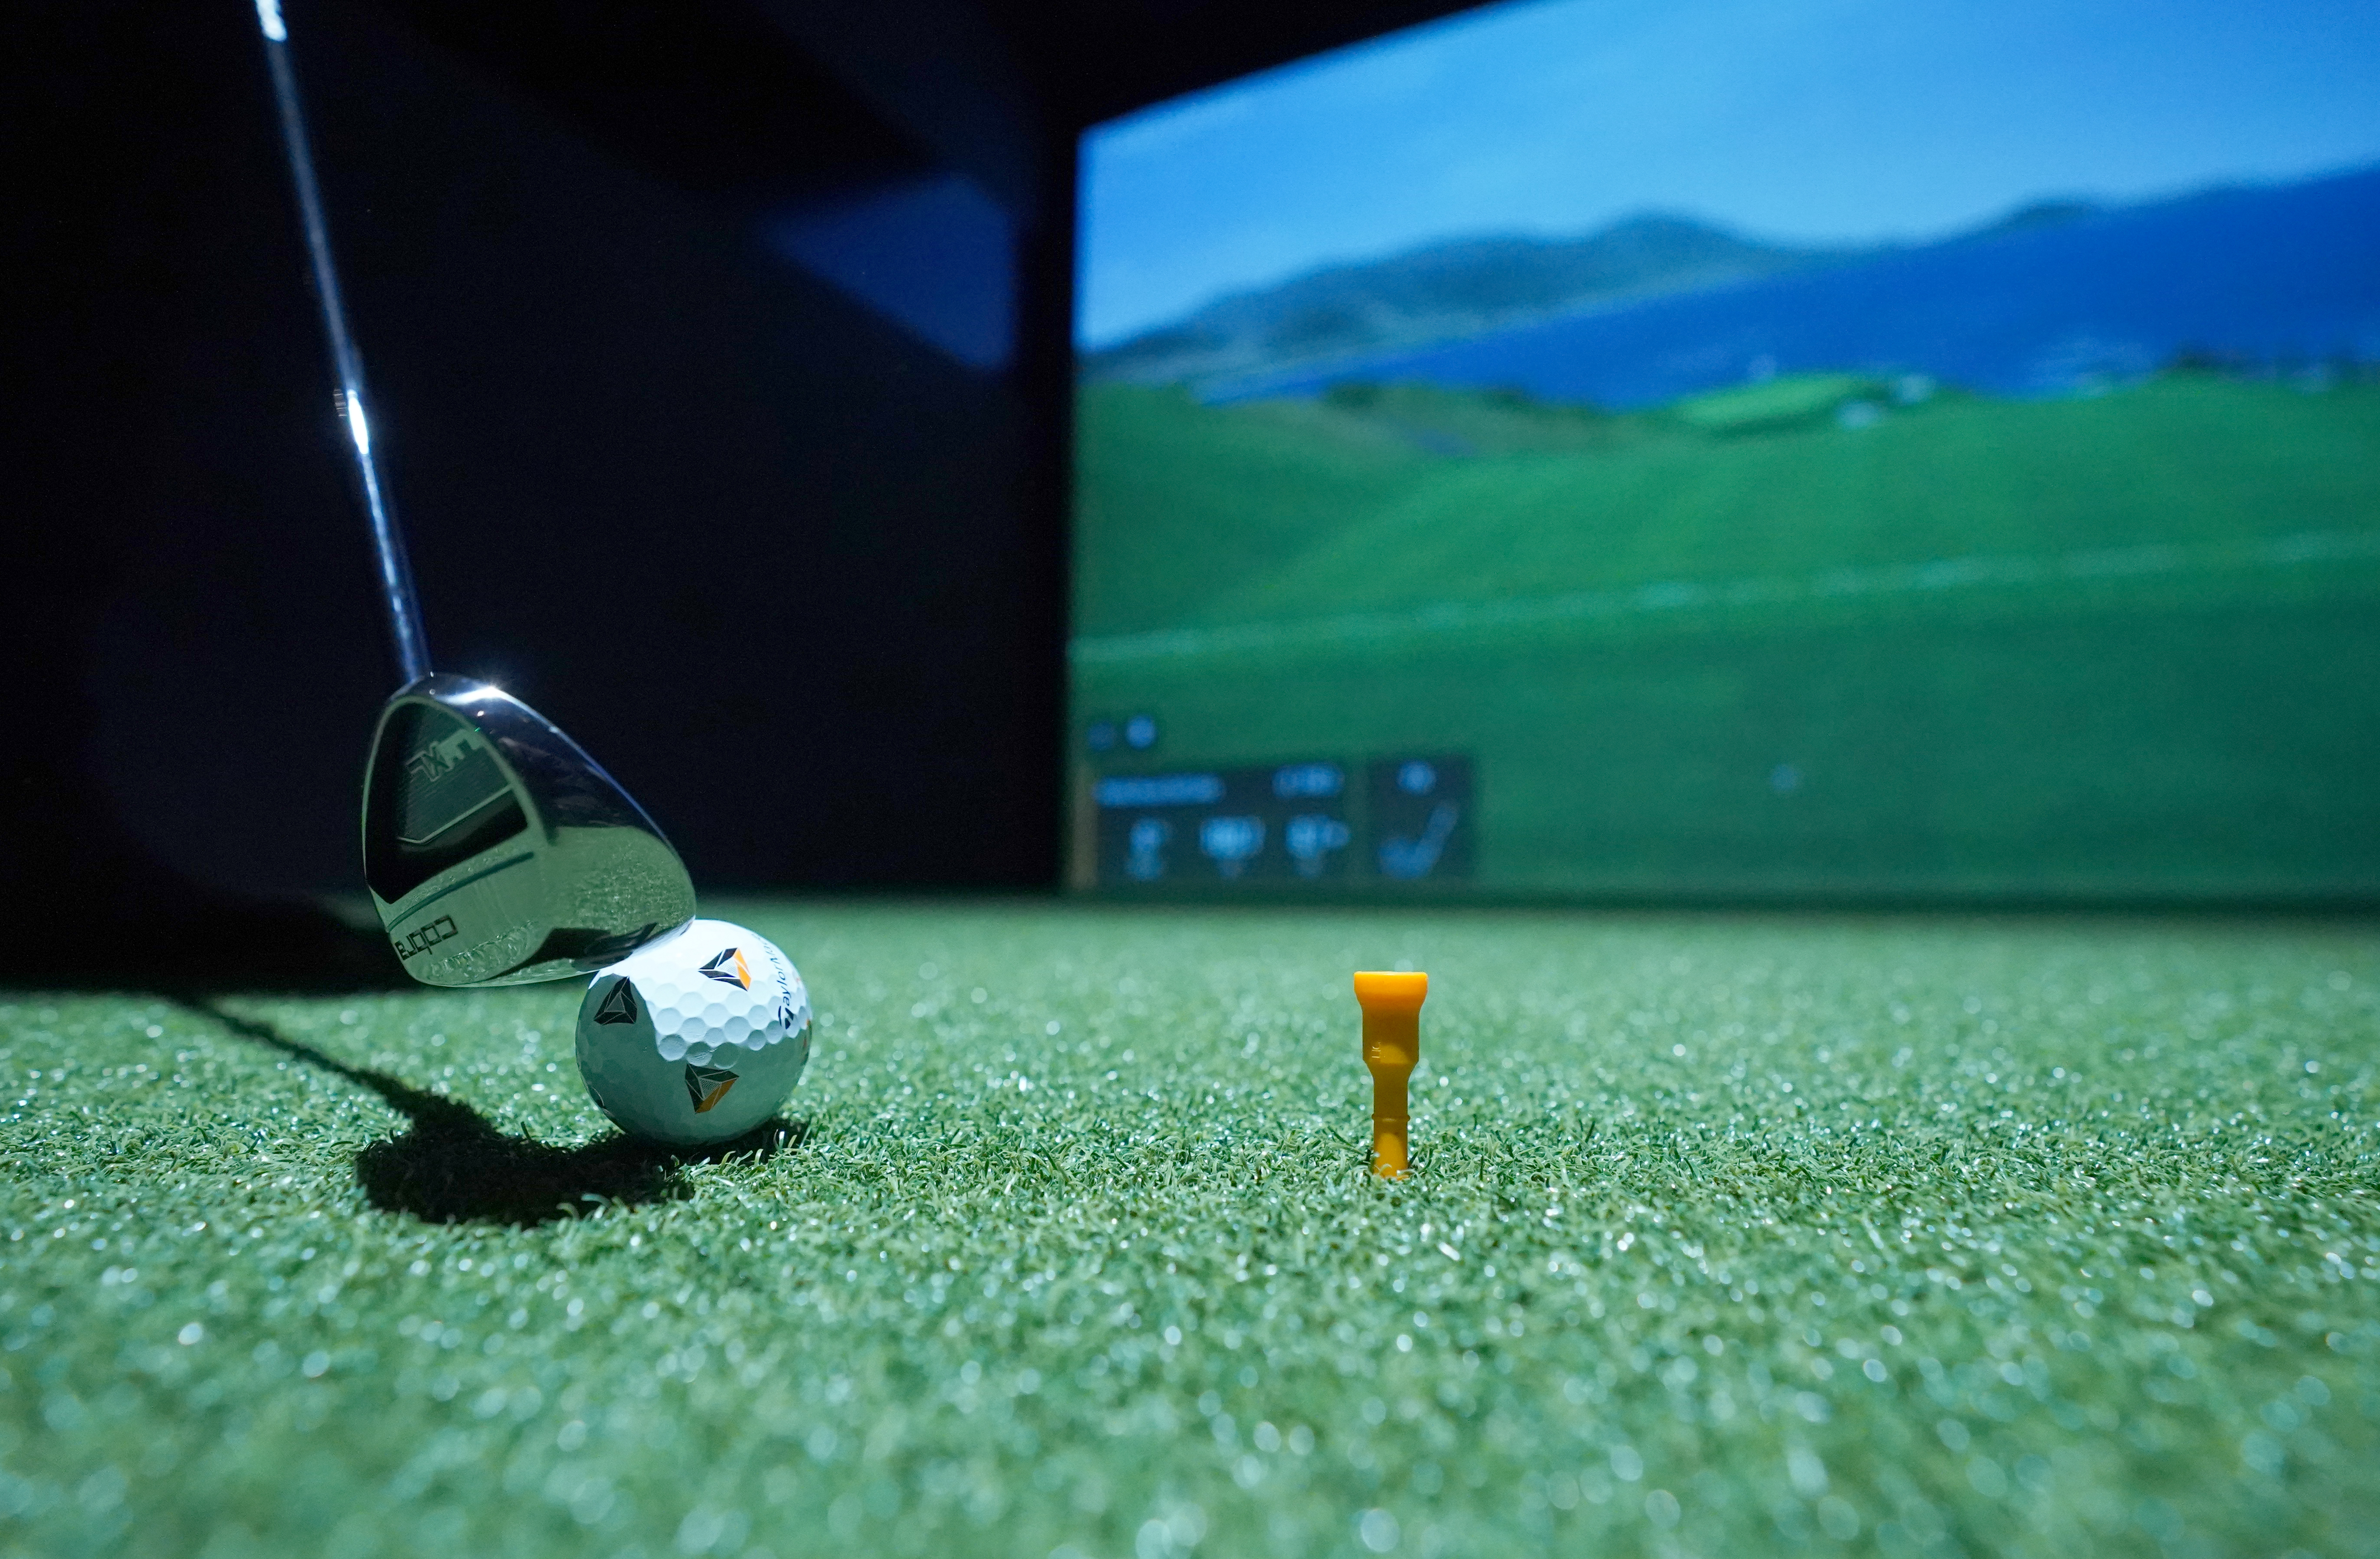 Is Five Iron the future of indoor golf?